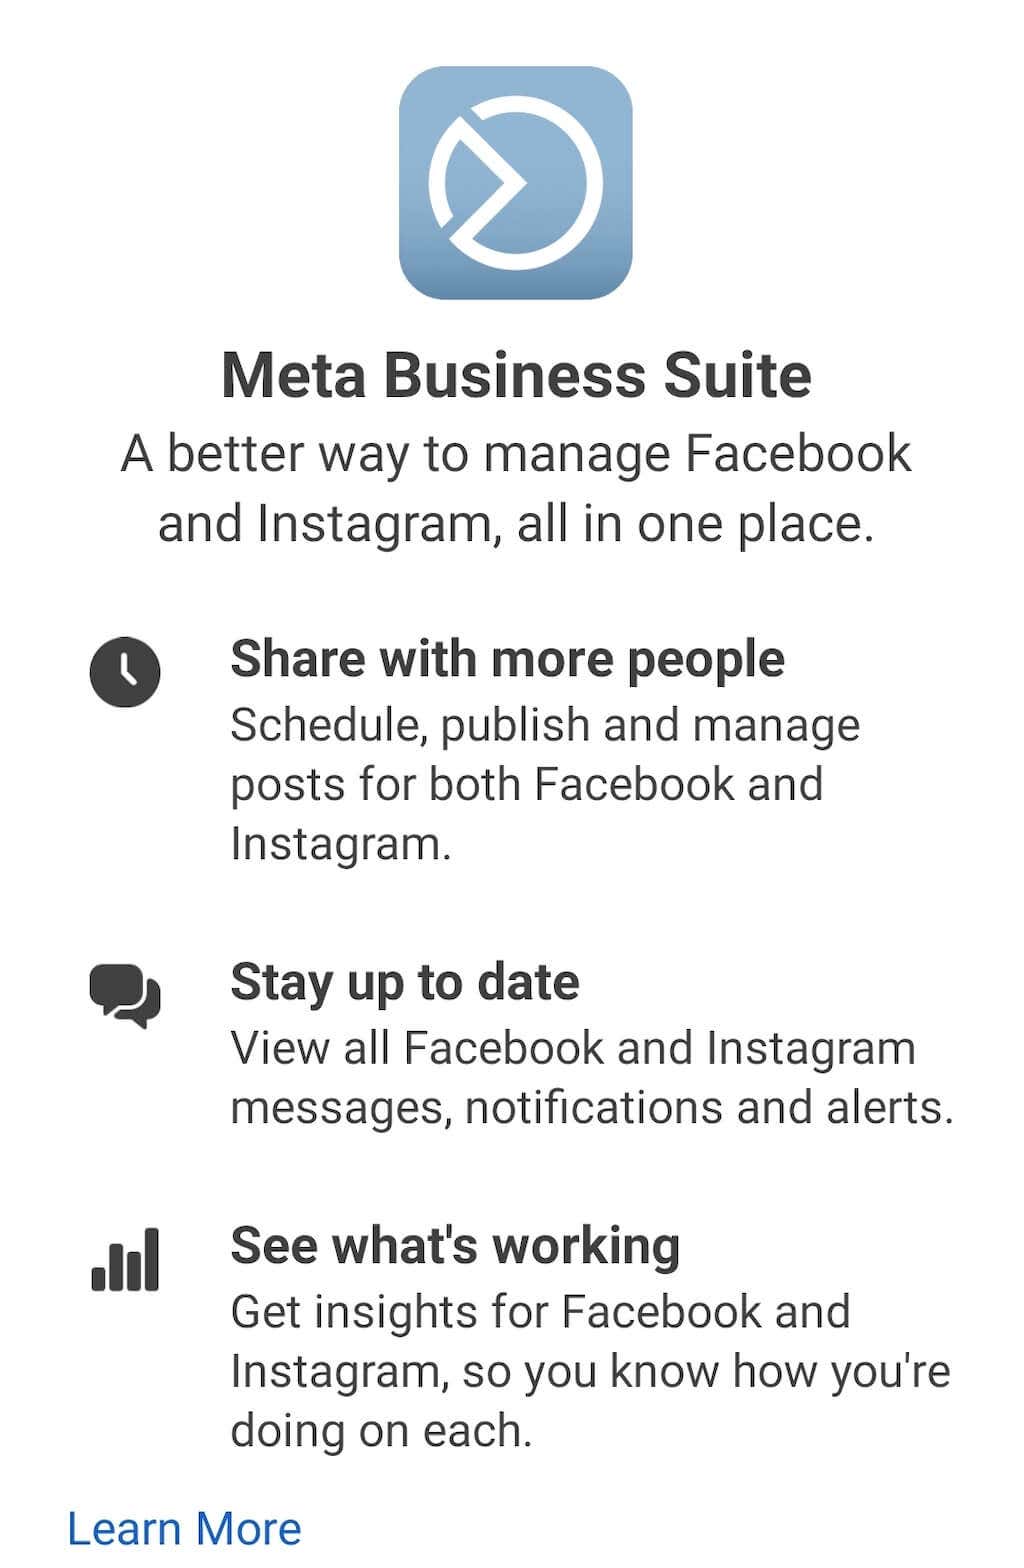 How To Access Meta Business Suite? What Is It? - WASK